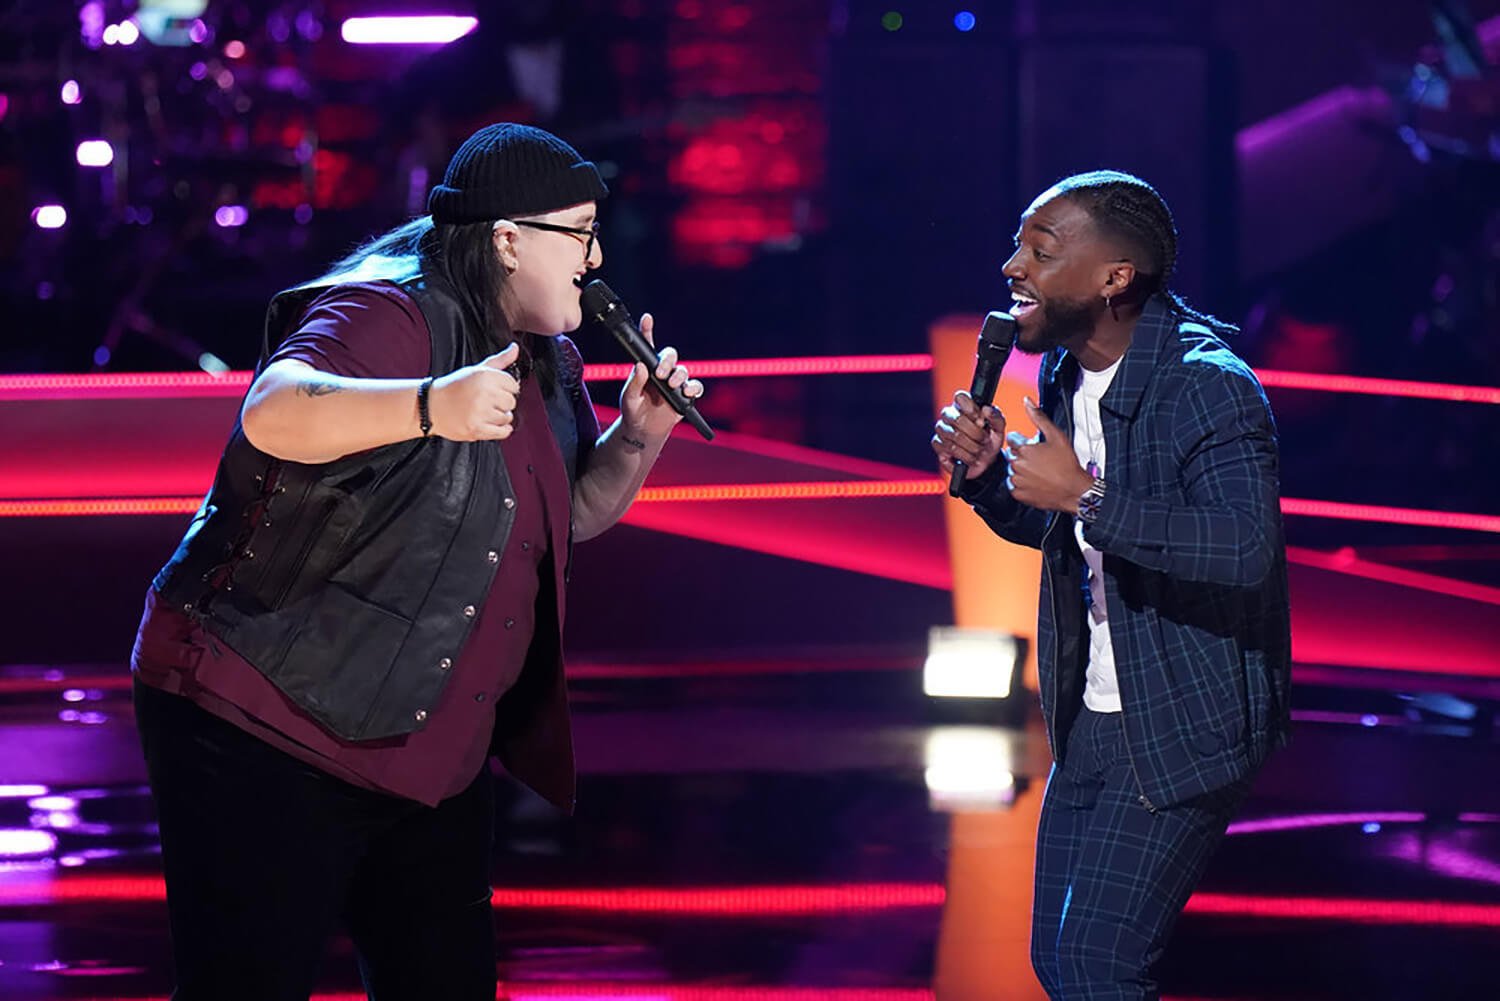 ALI performs with Playoff Pass recipient D Smooth in a Battle on The Voice Season 23